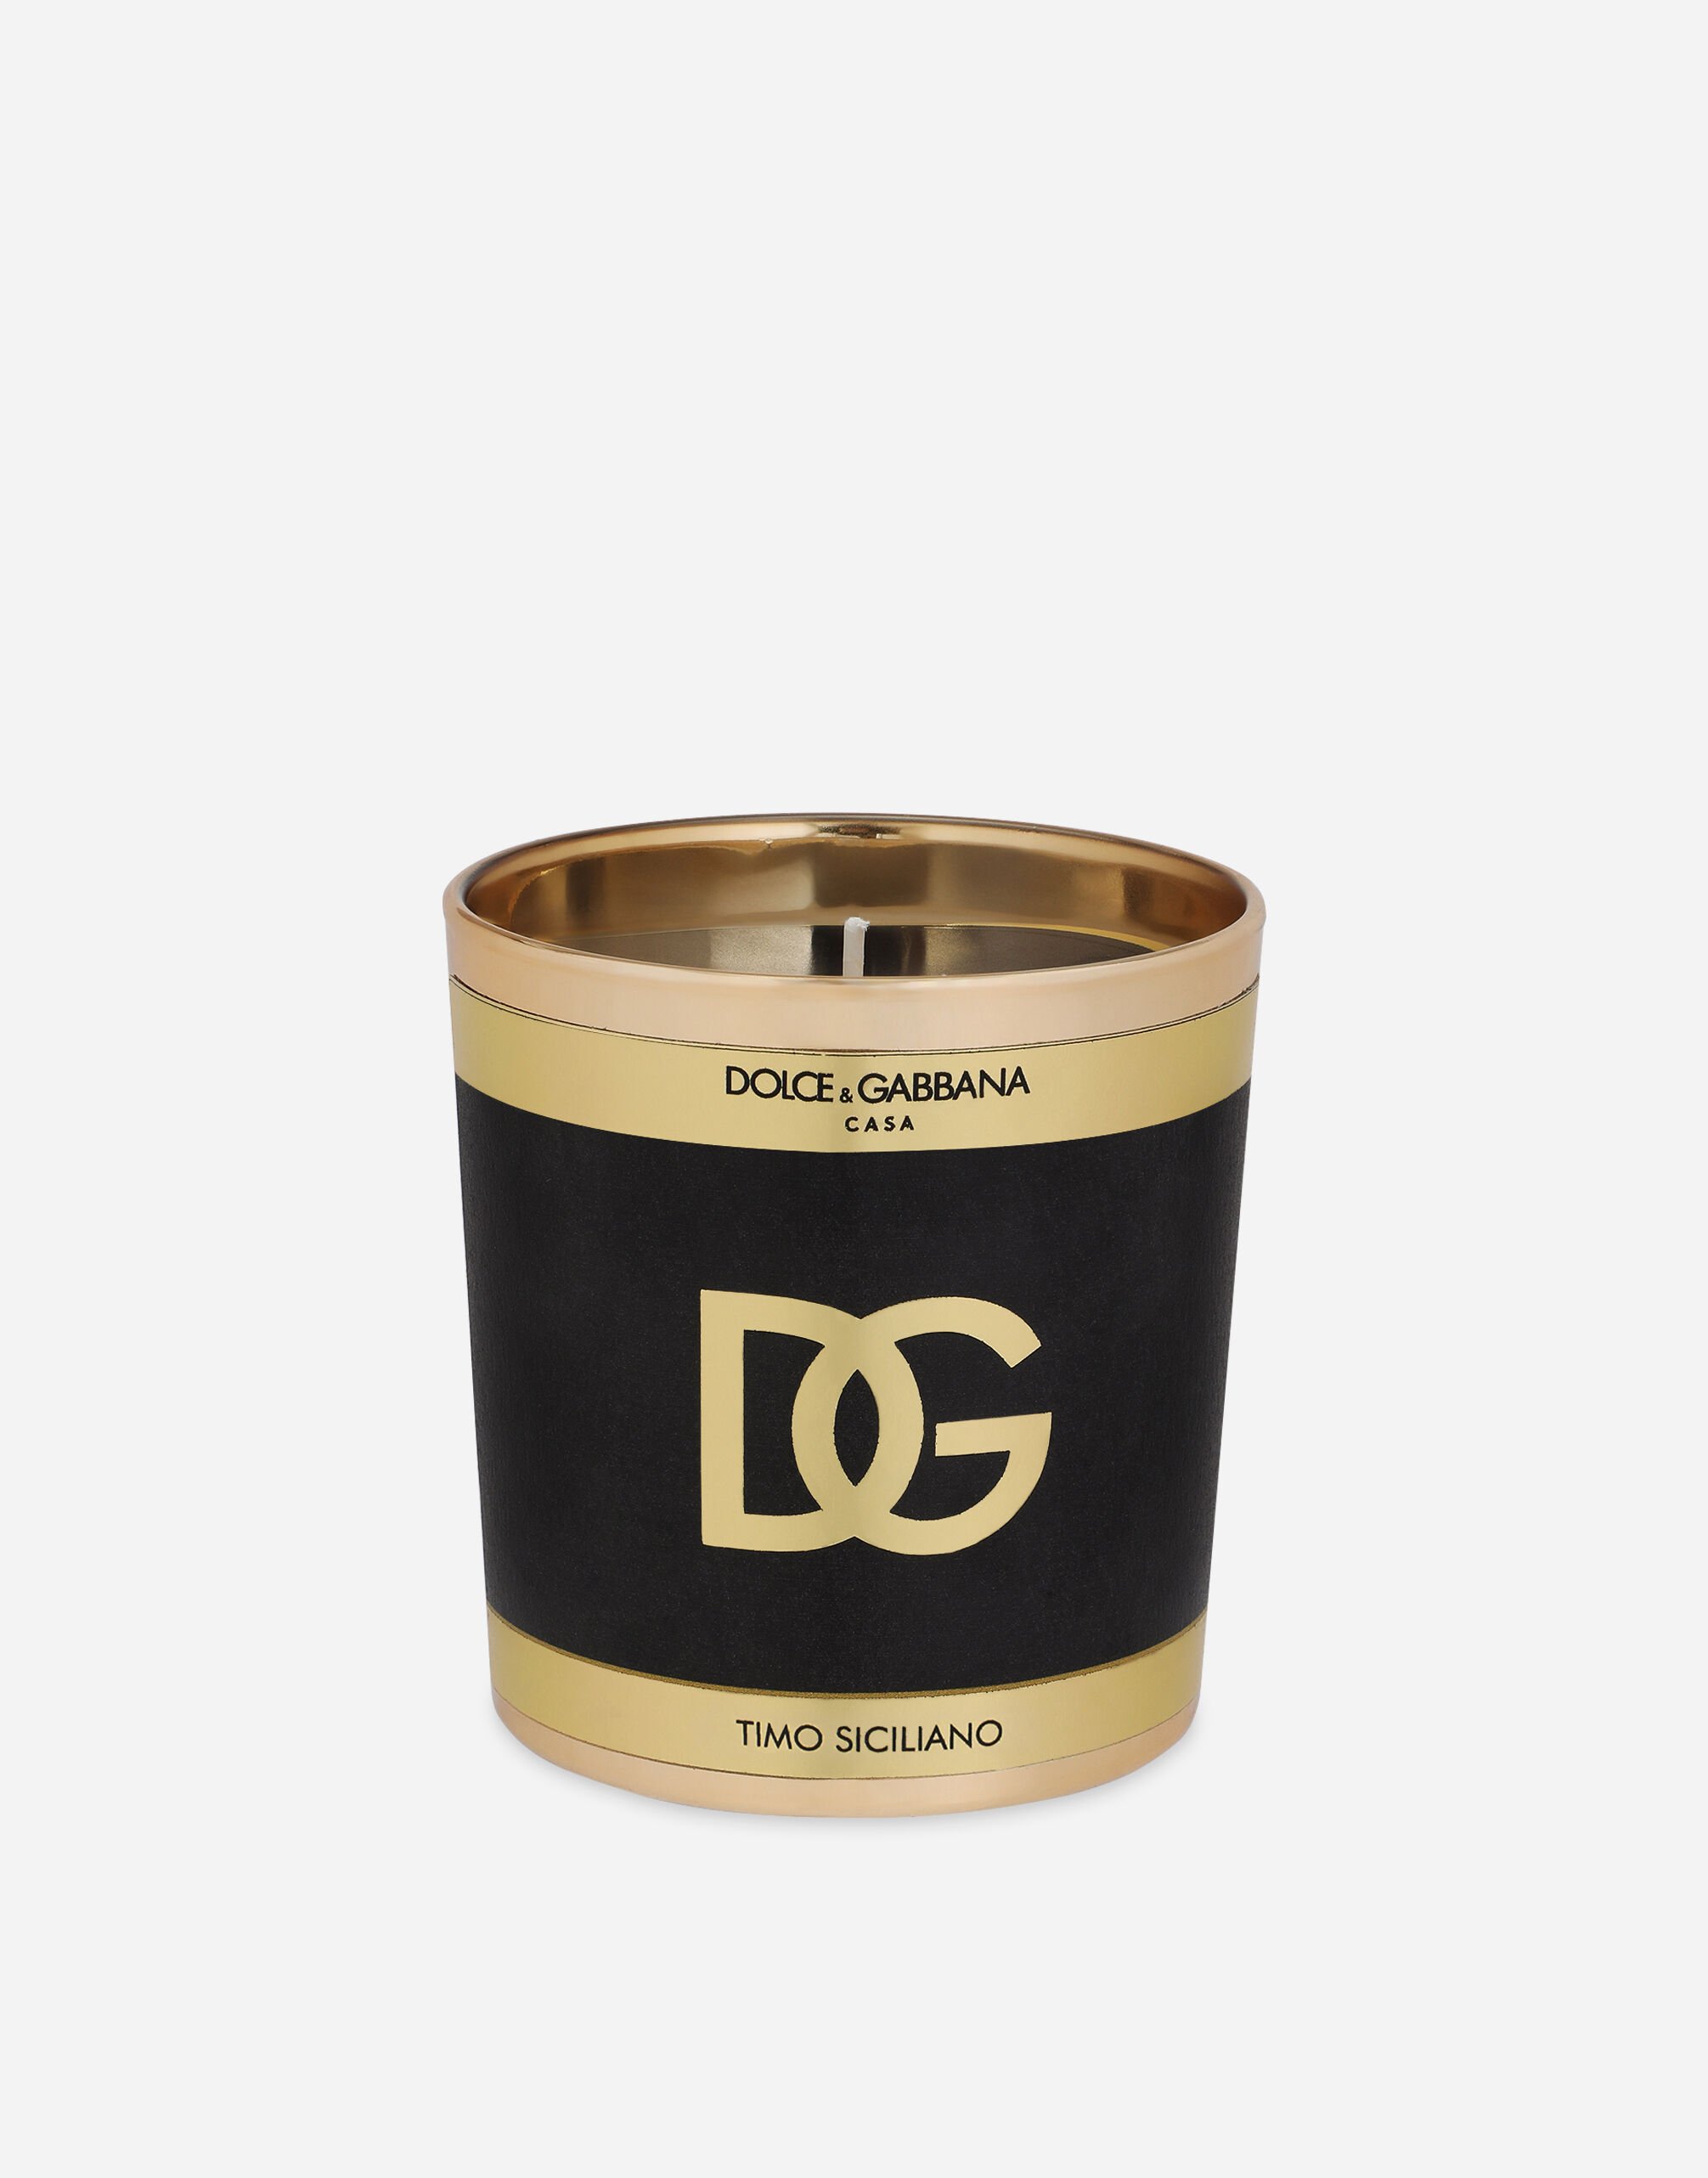 ${brand} Scented Candle - Sicilian Thyme ${colorDescription} ${masterID}